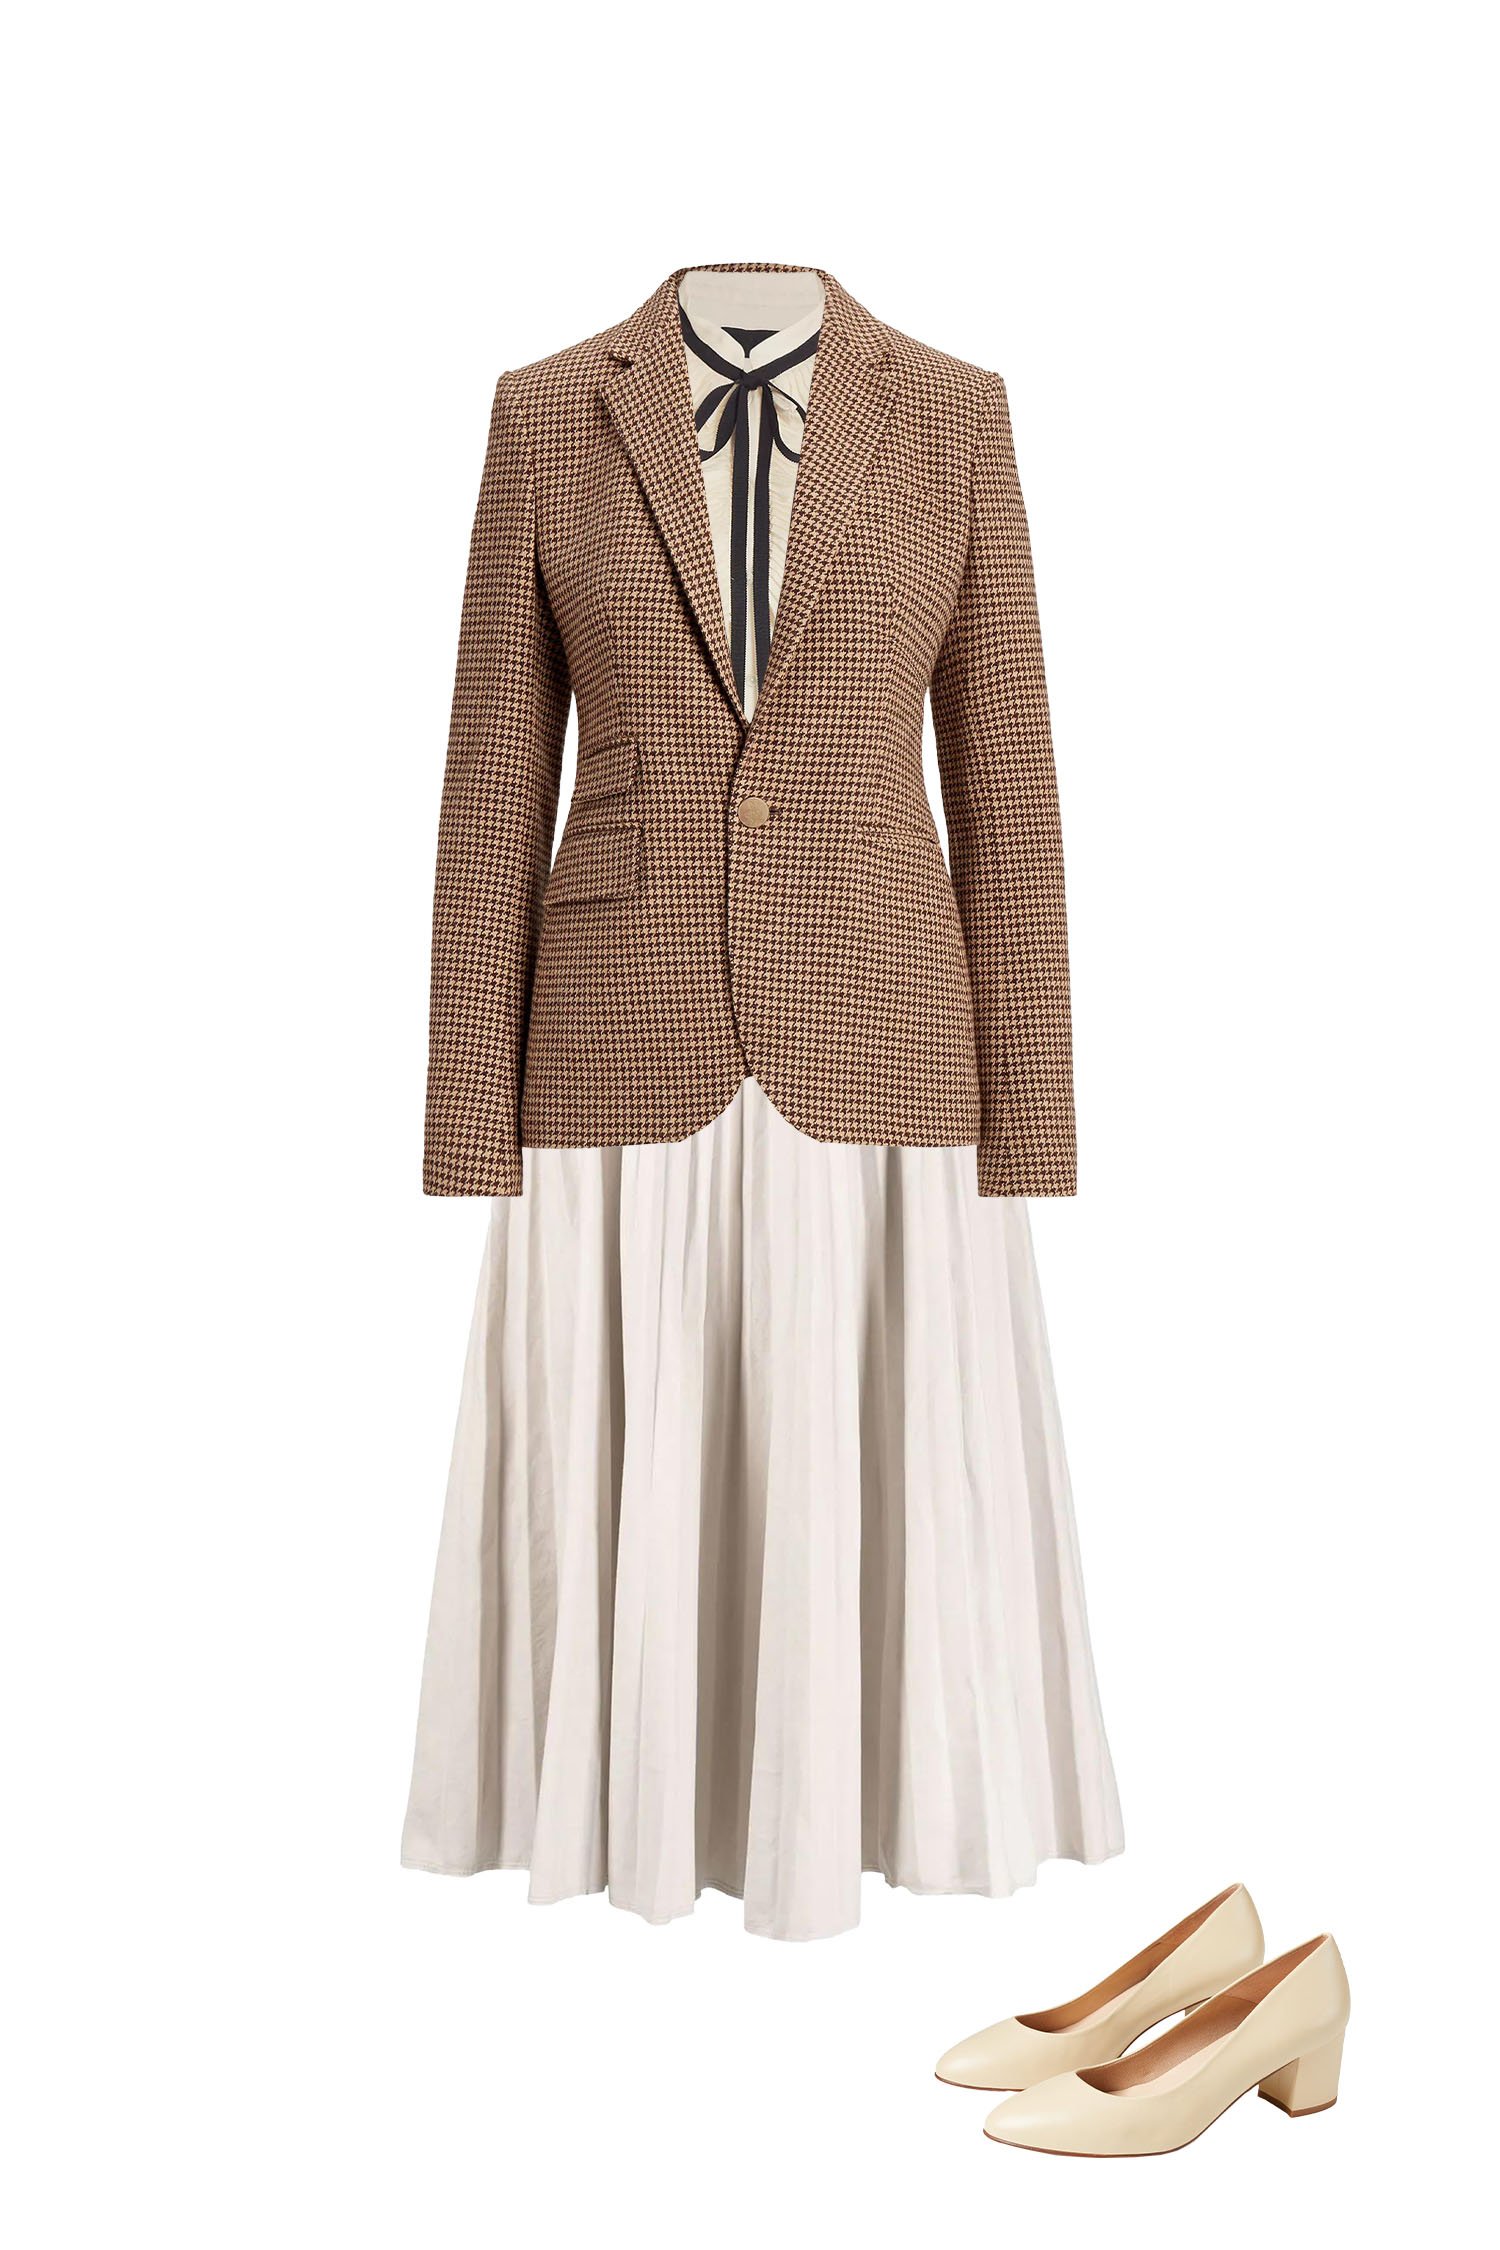 Business Casual Outfit - Beige Pleated Midi Skirt, Cream Ruffle and Black Bow Blouse, Camel Houndstooth Blazer, Cream Block Heel Pumps